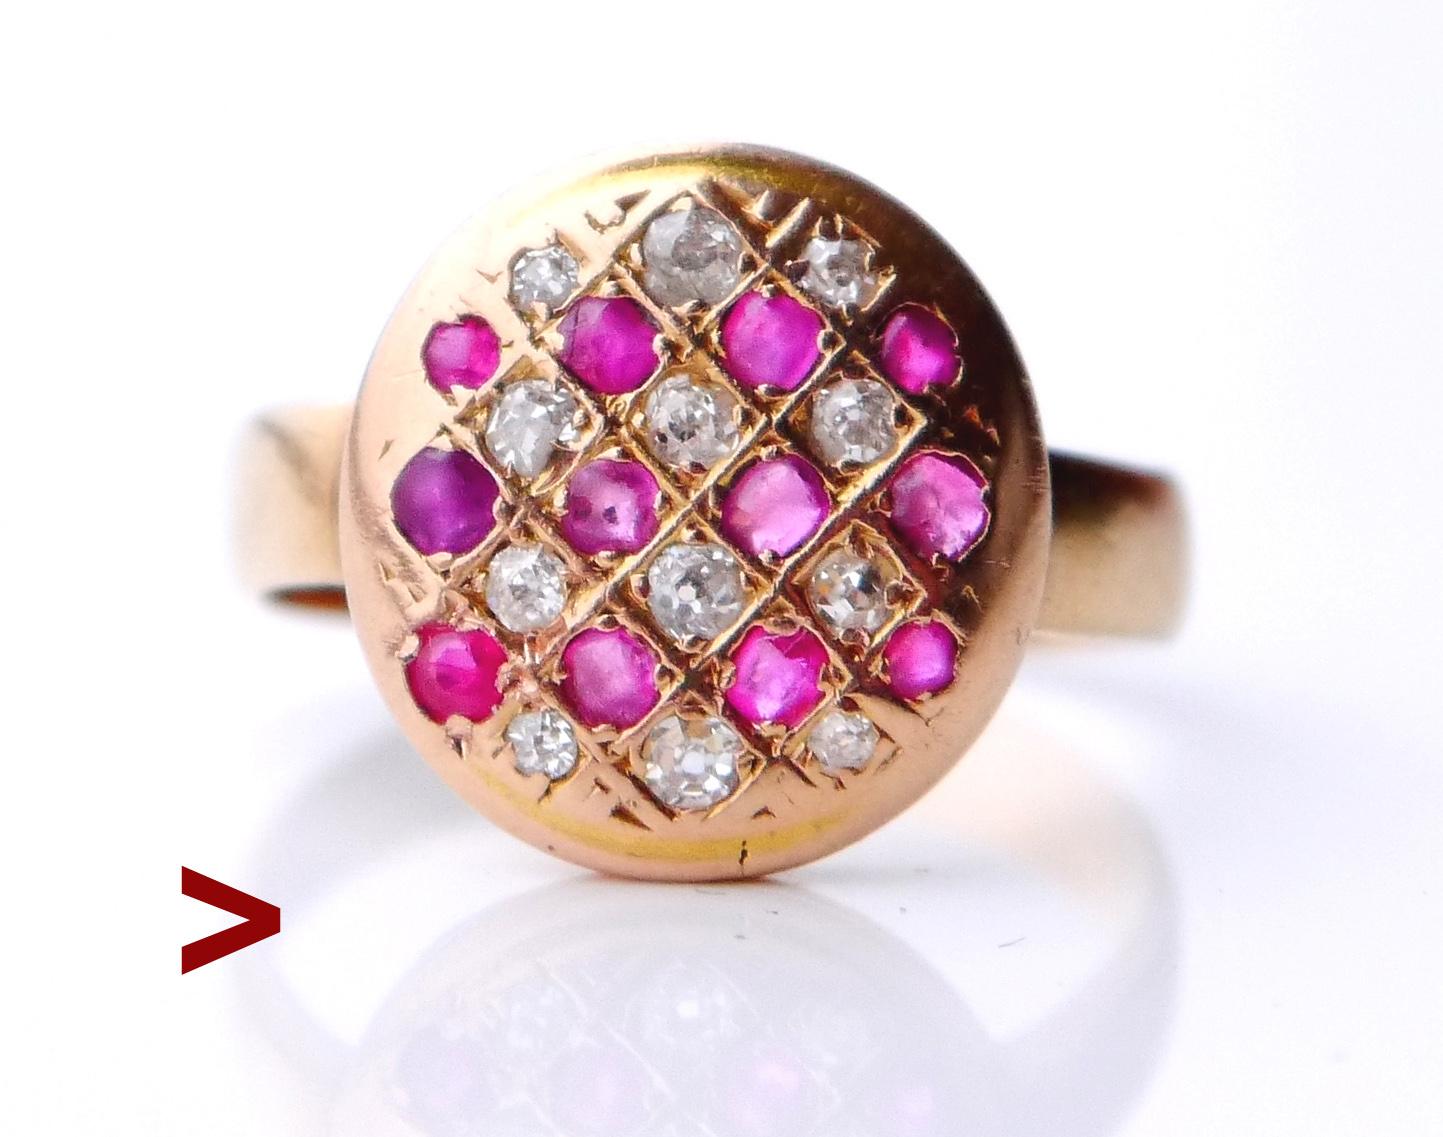 Old Ring in solid 18K Rose Gold with plain band. Round Crown Ø 12 mm x 3 mm deep with slightly convex surface is decorated with 25 pave set natural Rubies and Diamonds, all stones of old European diamond cut, in gradual sizes with open backs /